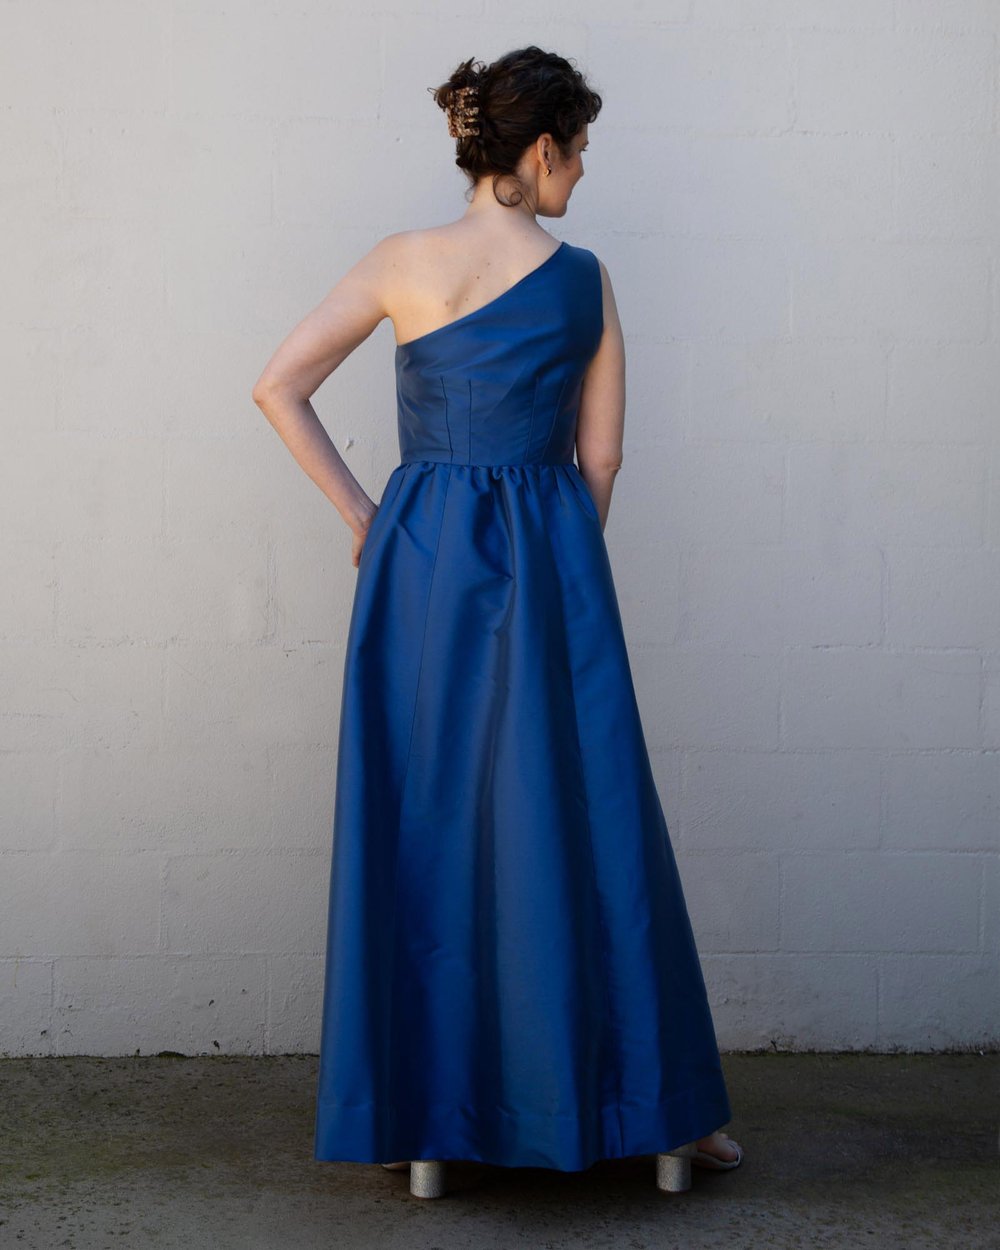 DIY One-Shoulder Evening Gown–Self-drafted by Sew DIY Patterns